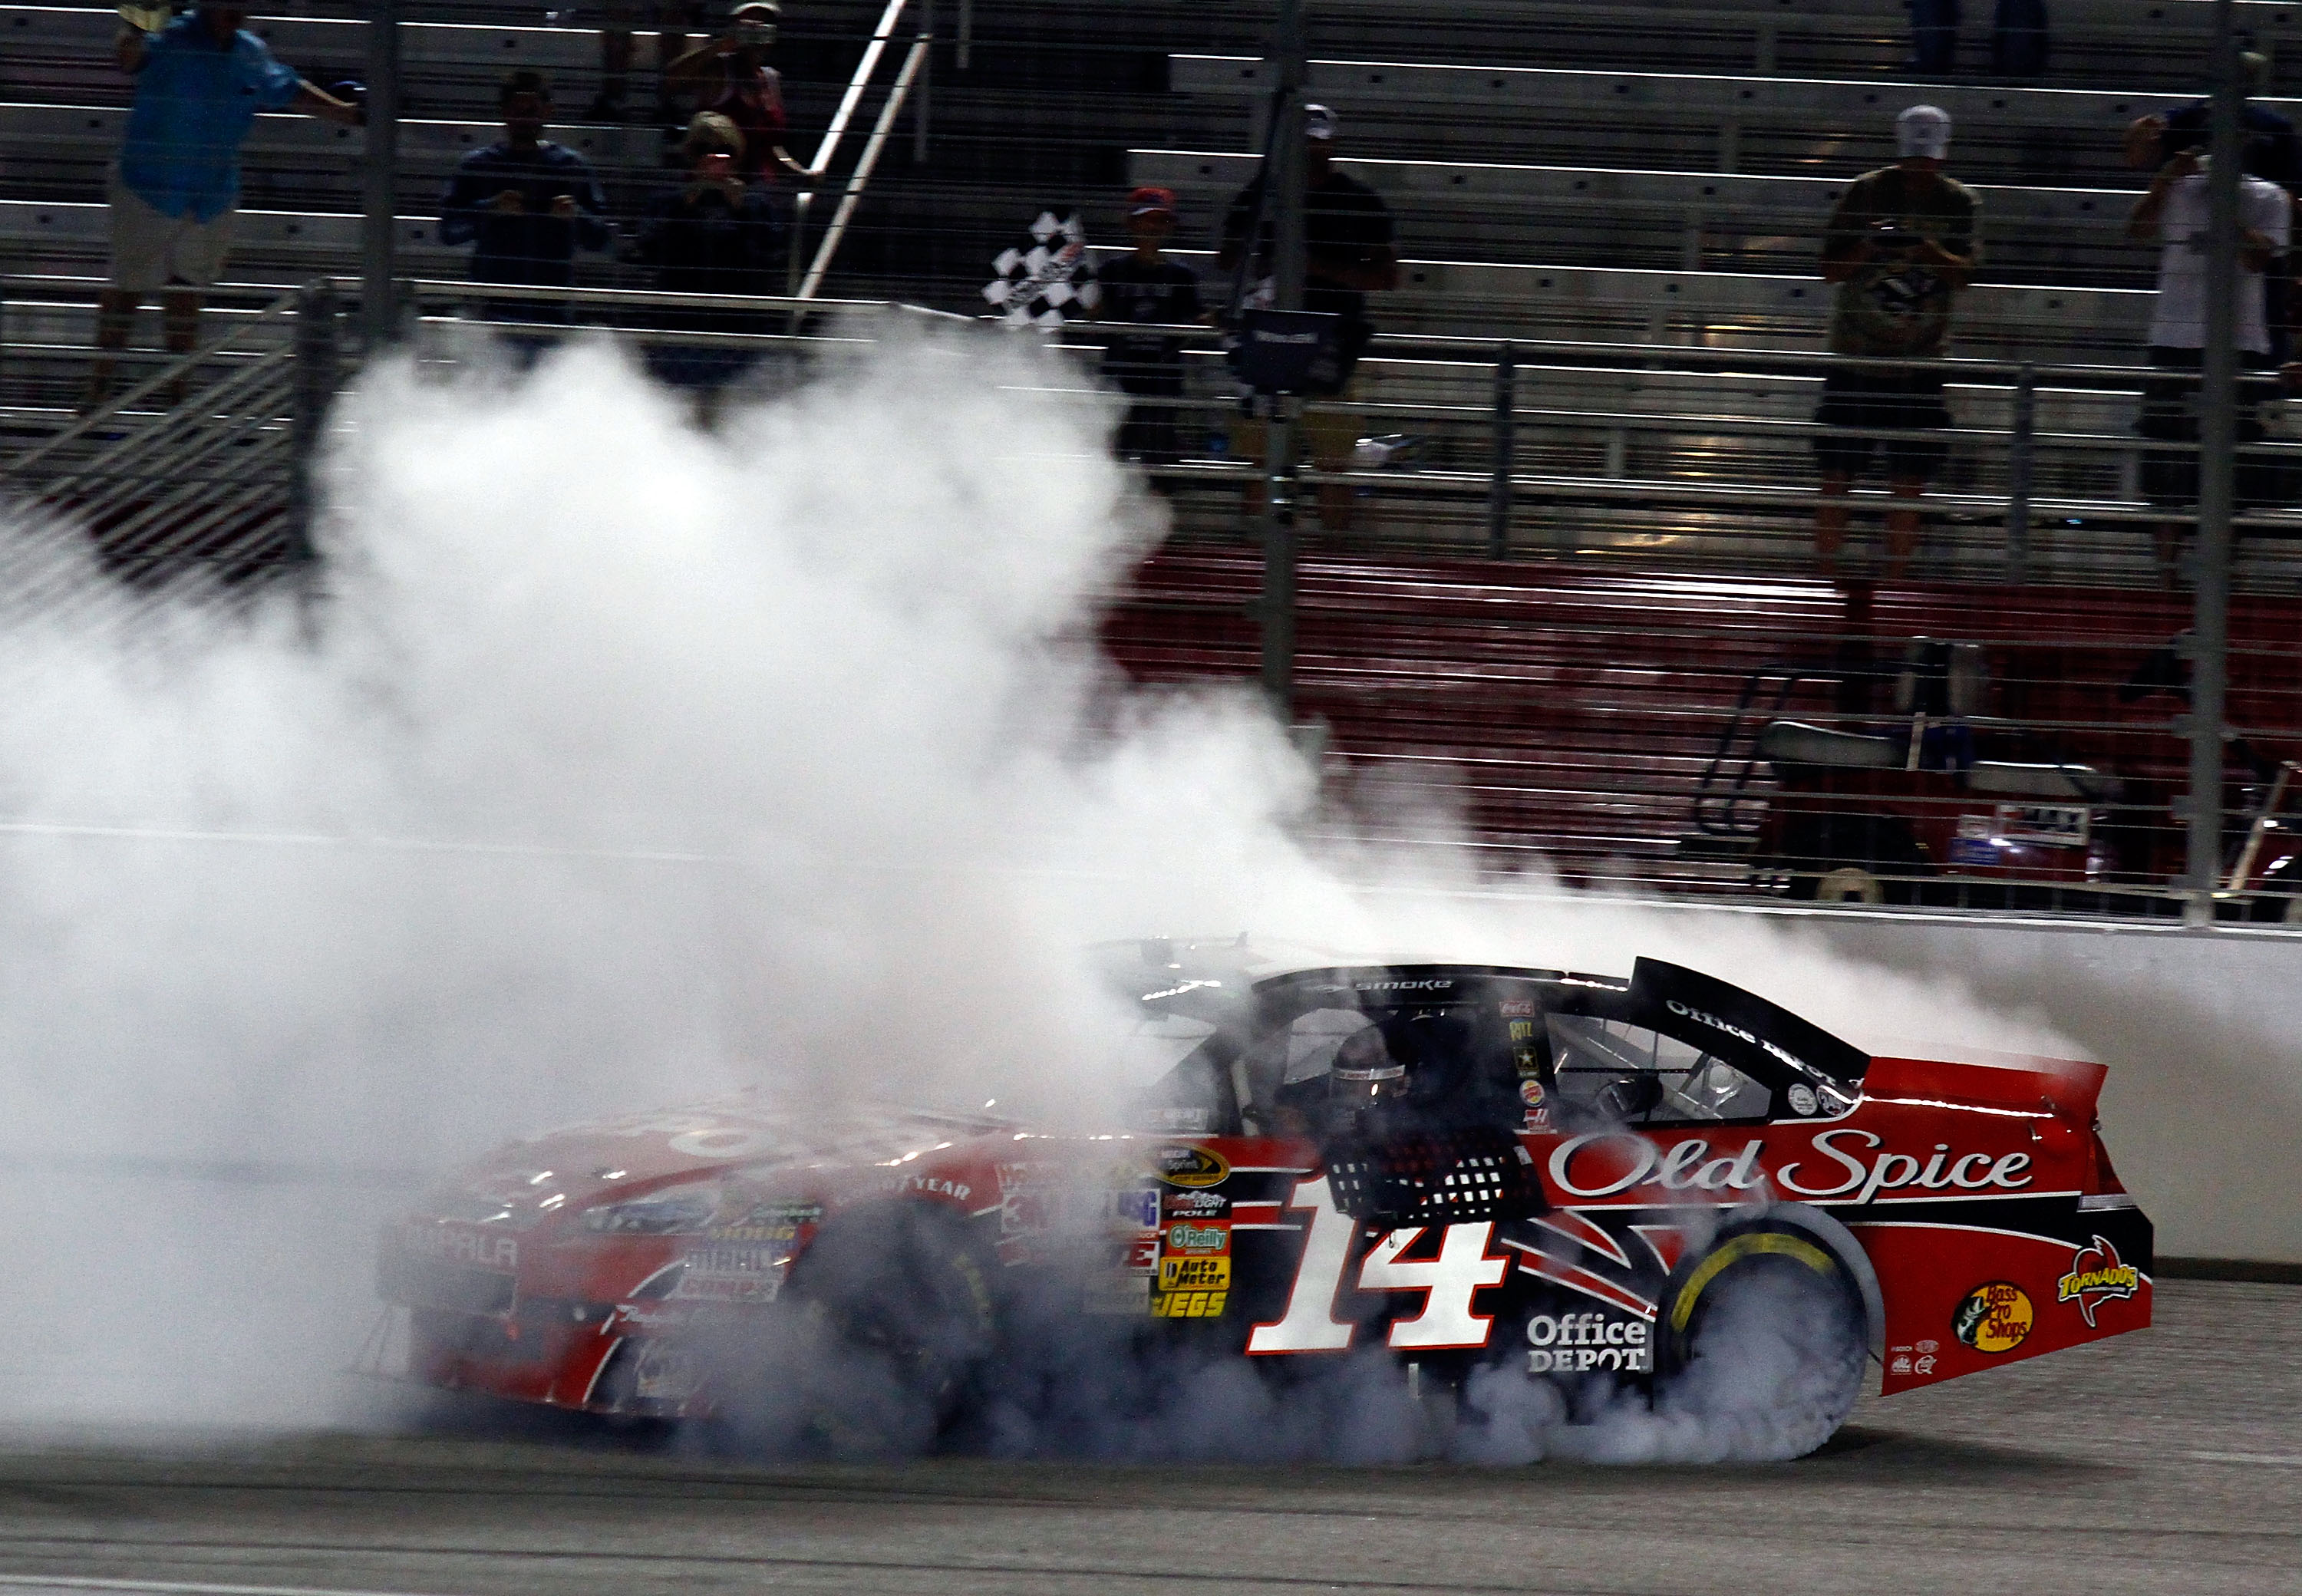 HAMPTON, GA - SEPTEMBER 05:  Tony Stewart, driver of the #14 Office Depot/Old Spice Chevrolet, performs a burnout to celebrate after winning the NASCAR Sprint Cup Series Emory Healthcare 500 at Atlanta Motor Speedway on September 5, 2010 in Hampton, Georg